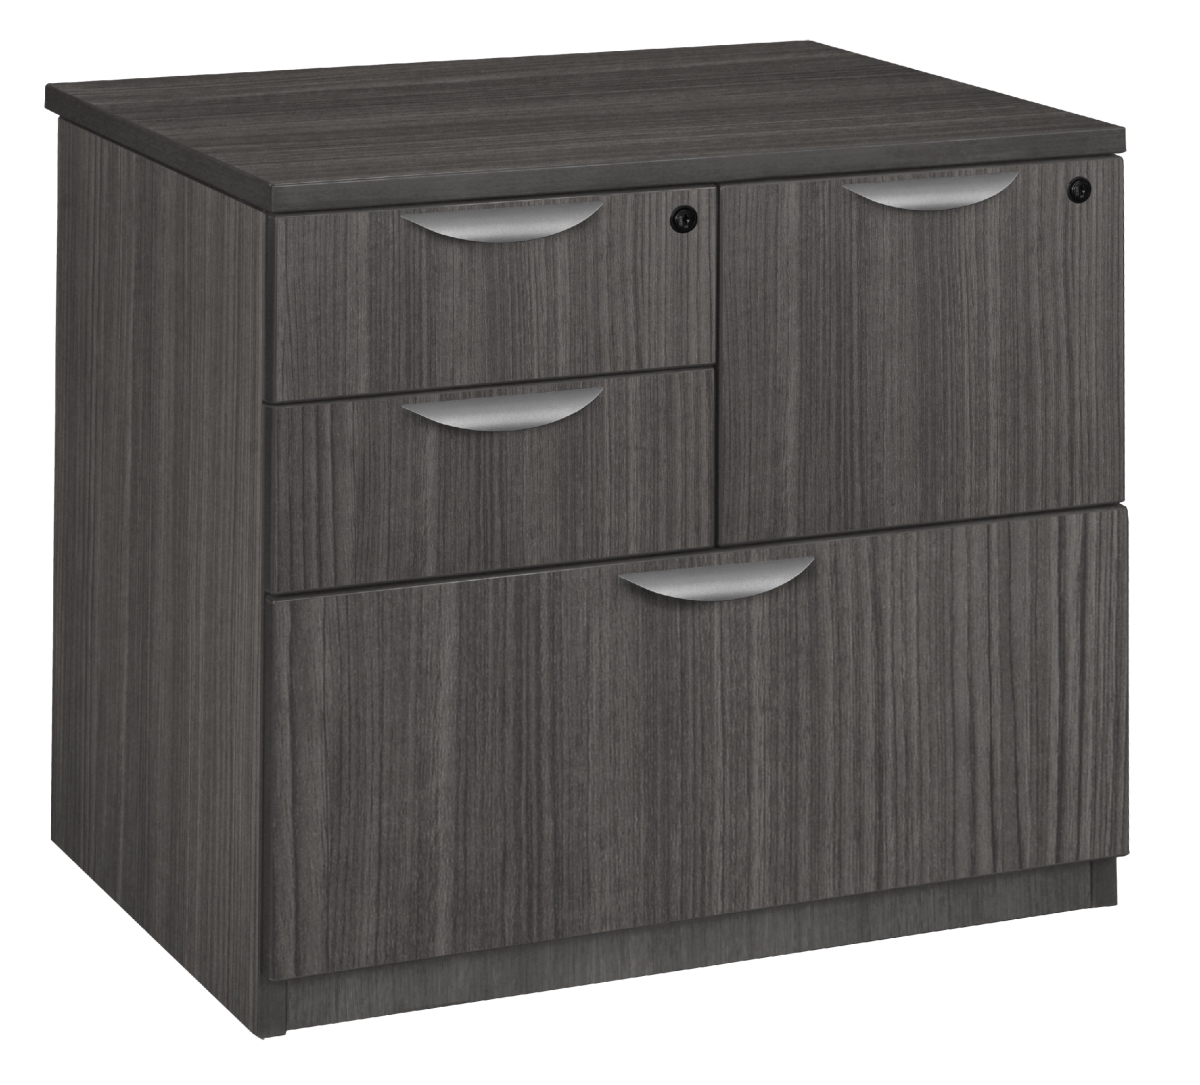 Lpcl3124ag Legacy Lateral Combo File, Ash Grey